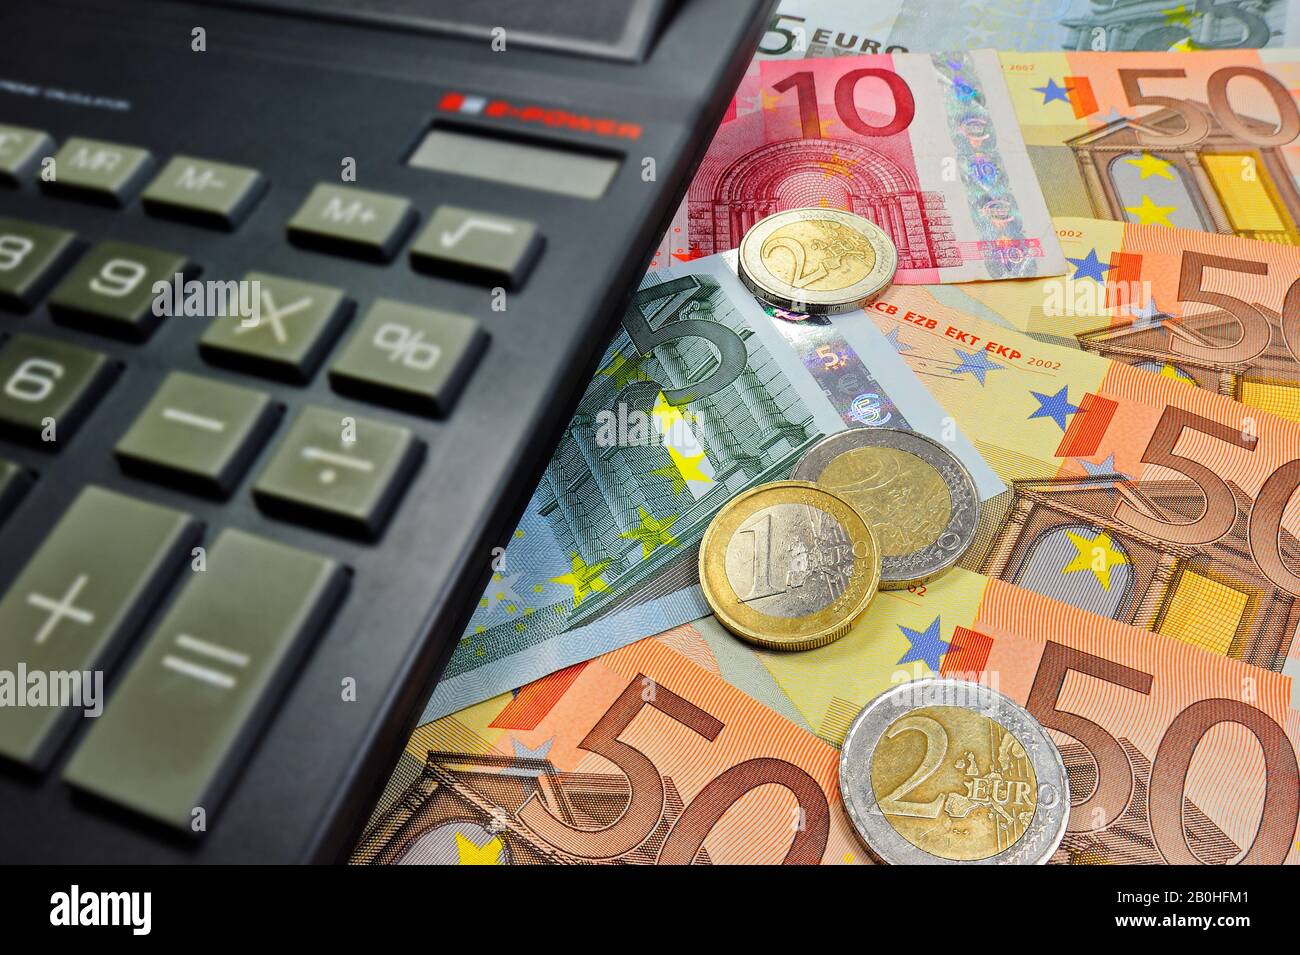 Euro banknotes and coins and pocket calculator Stock Photo